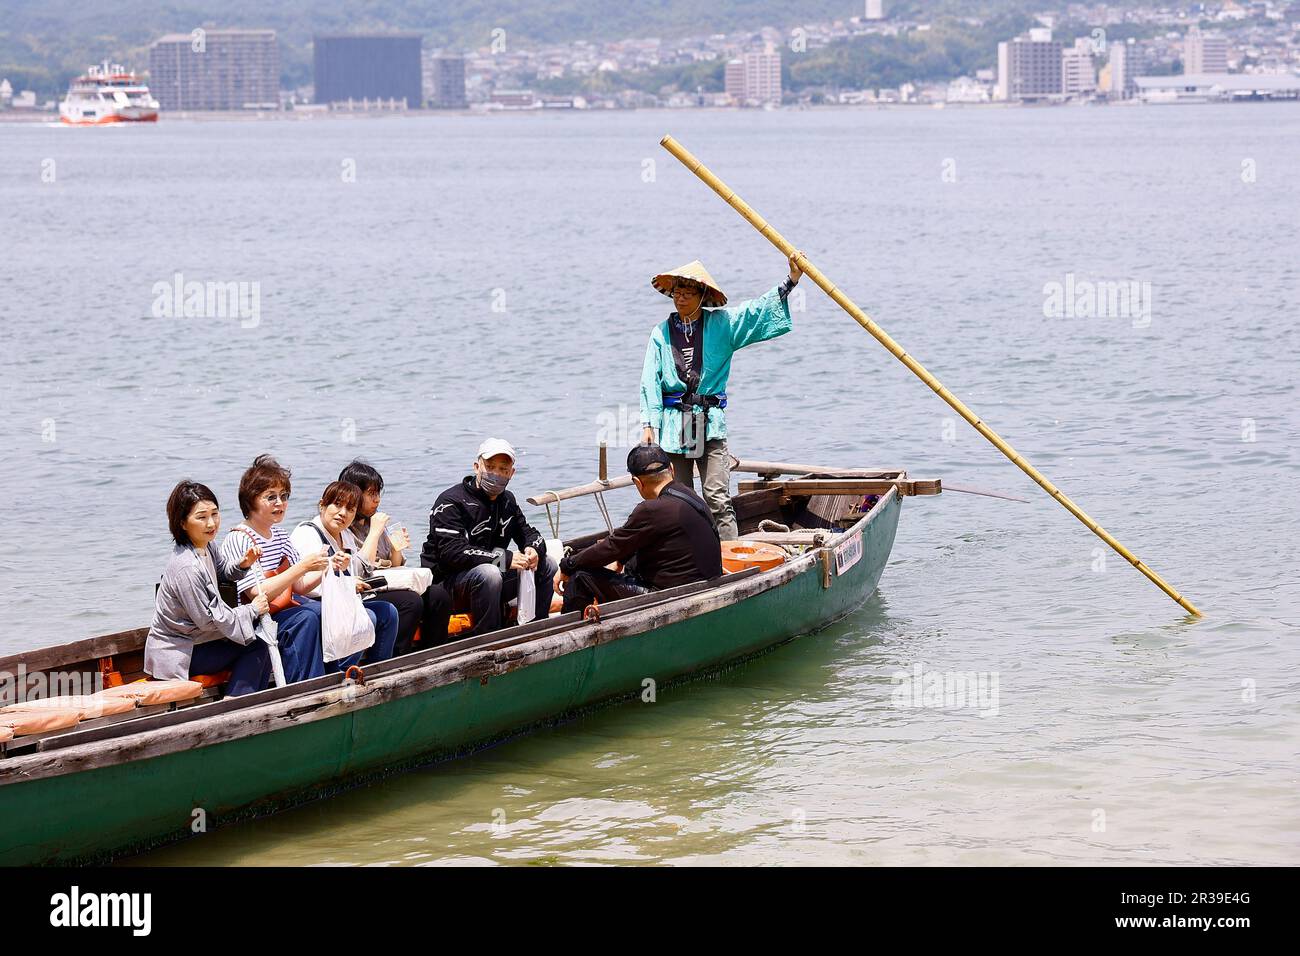 Miyajima, Japan, May 22, 2023 - Visitors enjoy a bout tour in Miyajima. Visitors returned to Itsukushima-jinja Shrine a day after the leaders’ meeting G7 Hiroshima Summit ended on May 21. The Shinto shrine is well known for its iconic floating Itsukushima Jinja Otorii (Grand Torii Gate) and World Heritage Site. Stock Photo